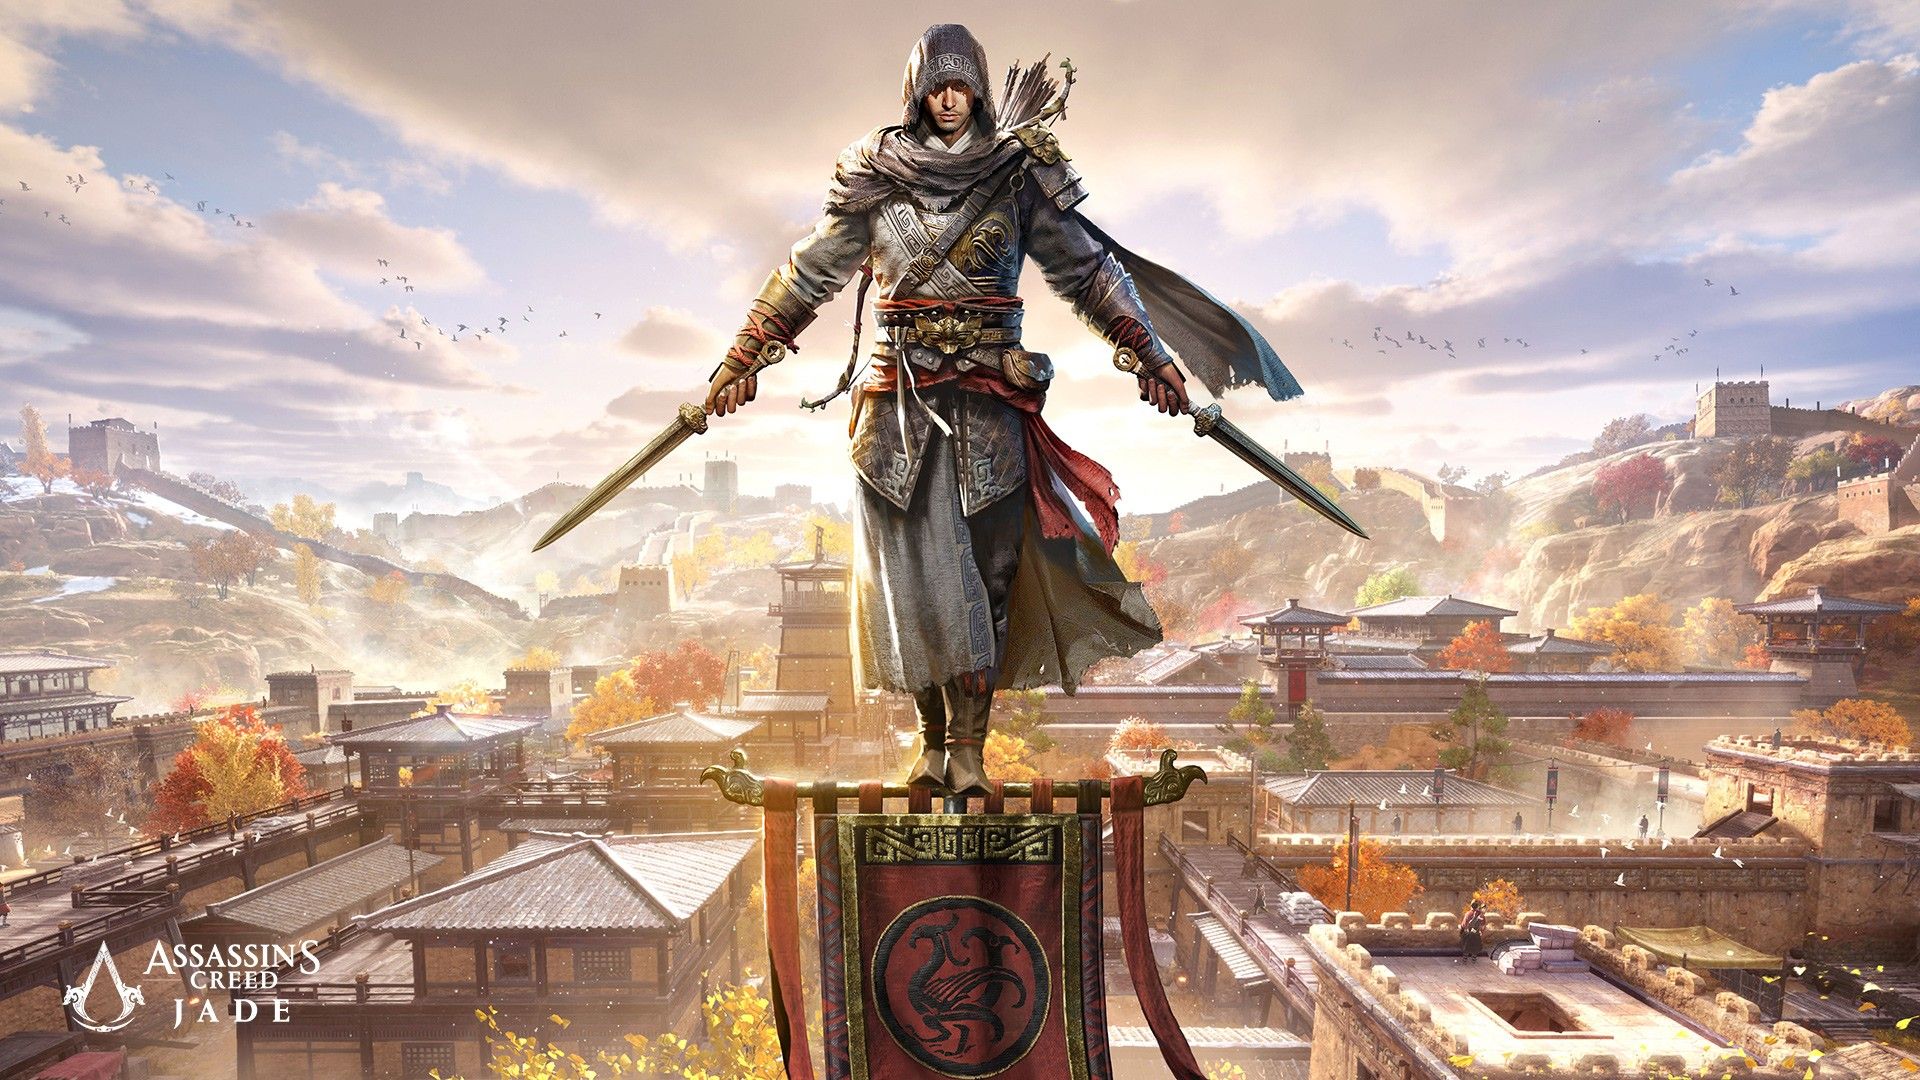 Assassin’s Creed Jade Hands-On Preview: Mobile That Works